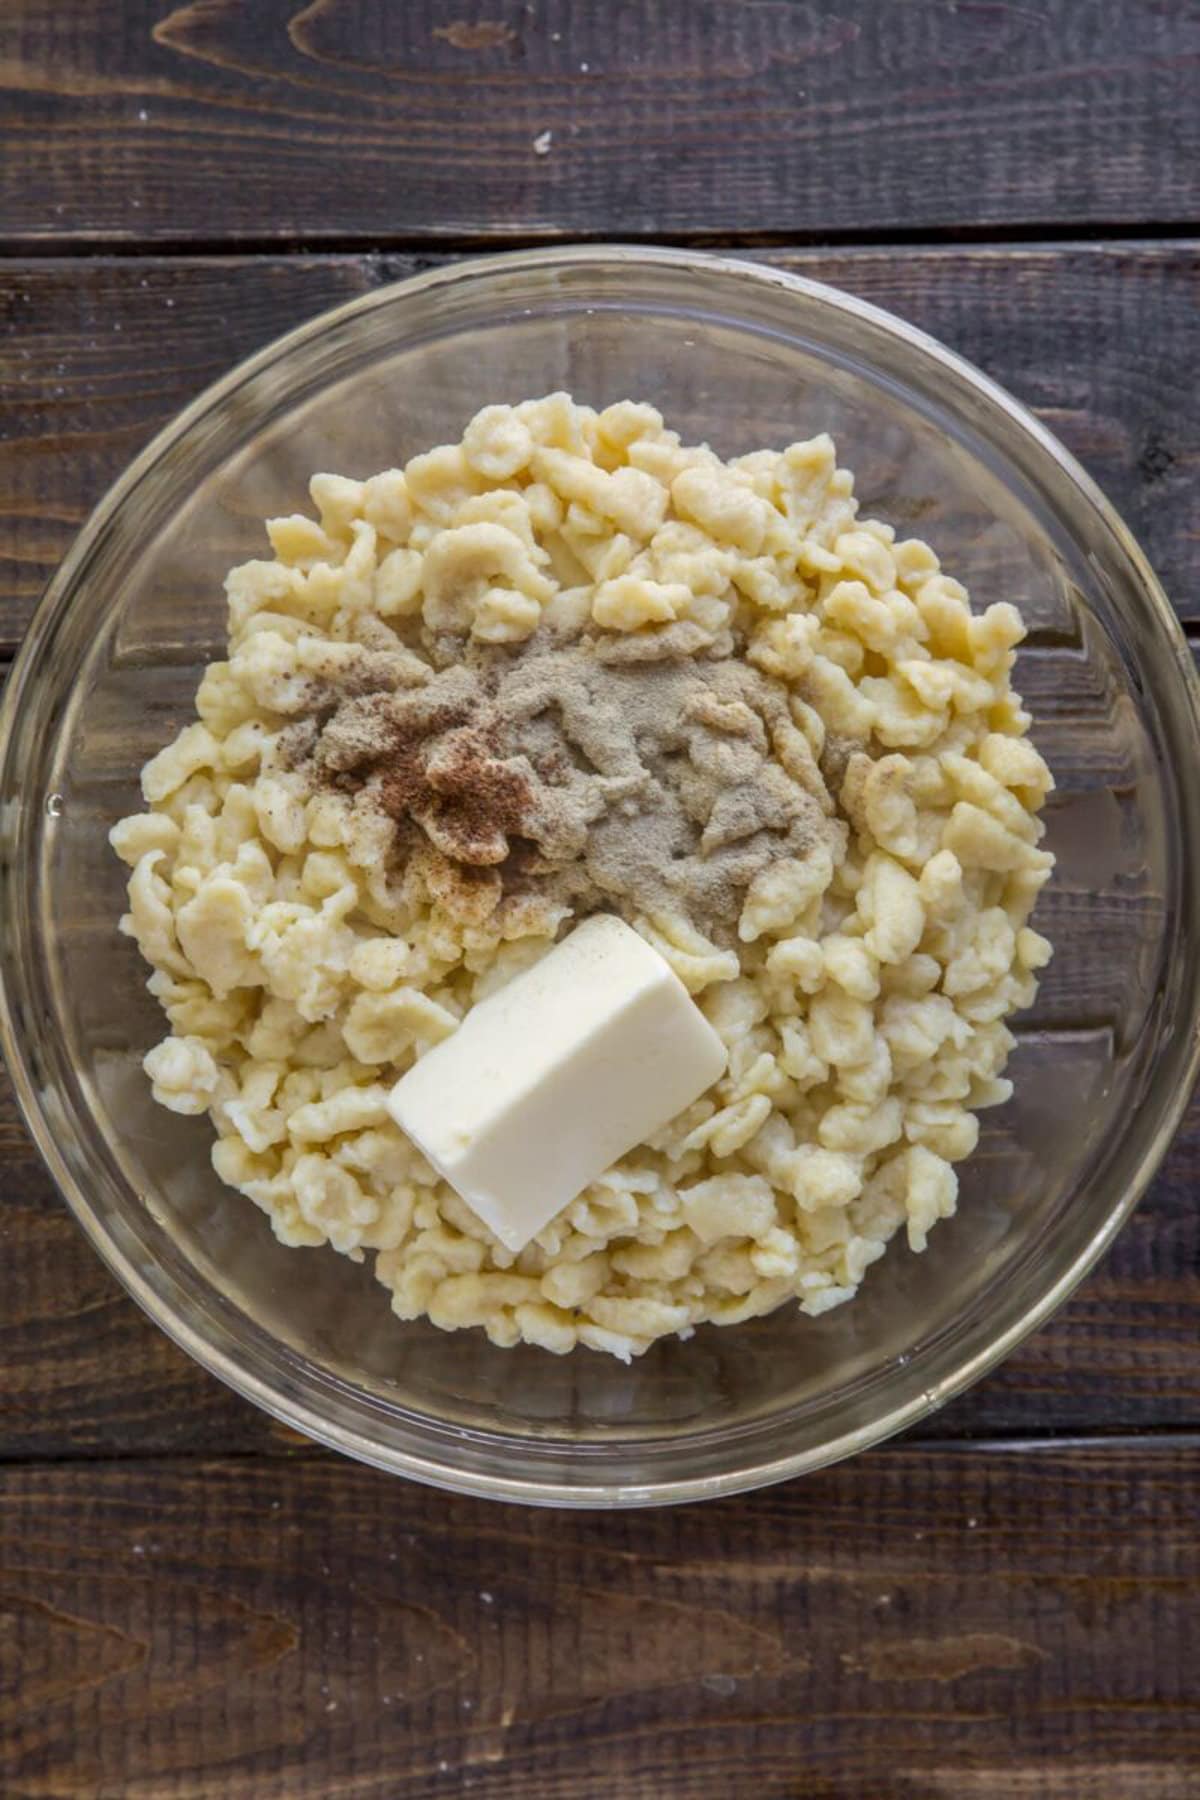 German Spaetzle in a clear bowl with butter and spices added.